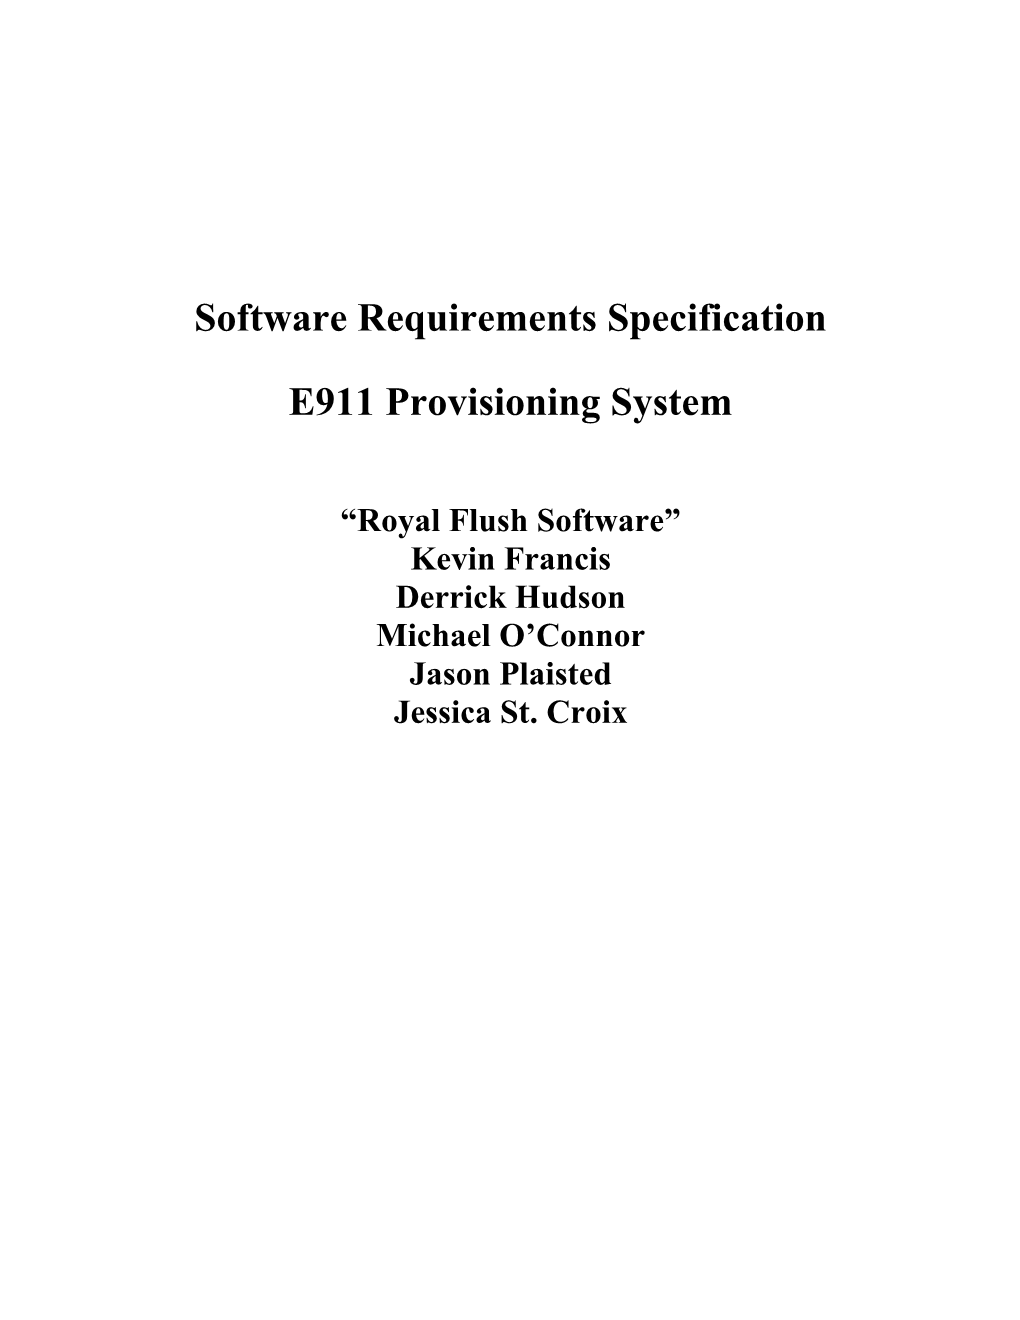 Software Requirements Specification s1